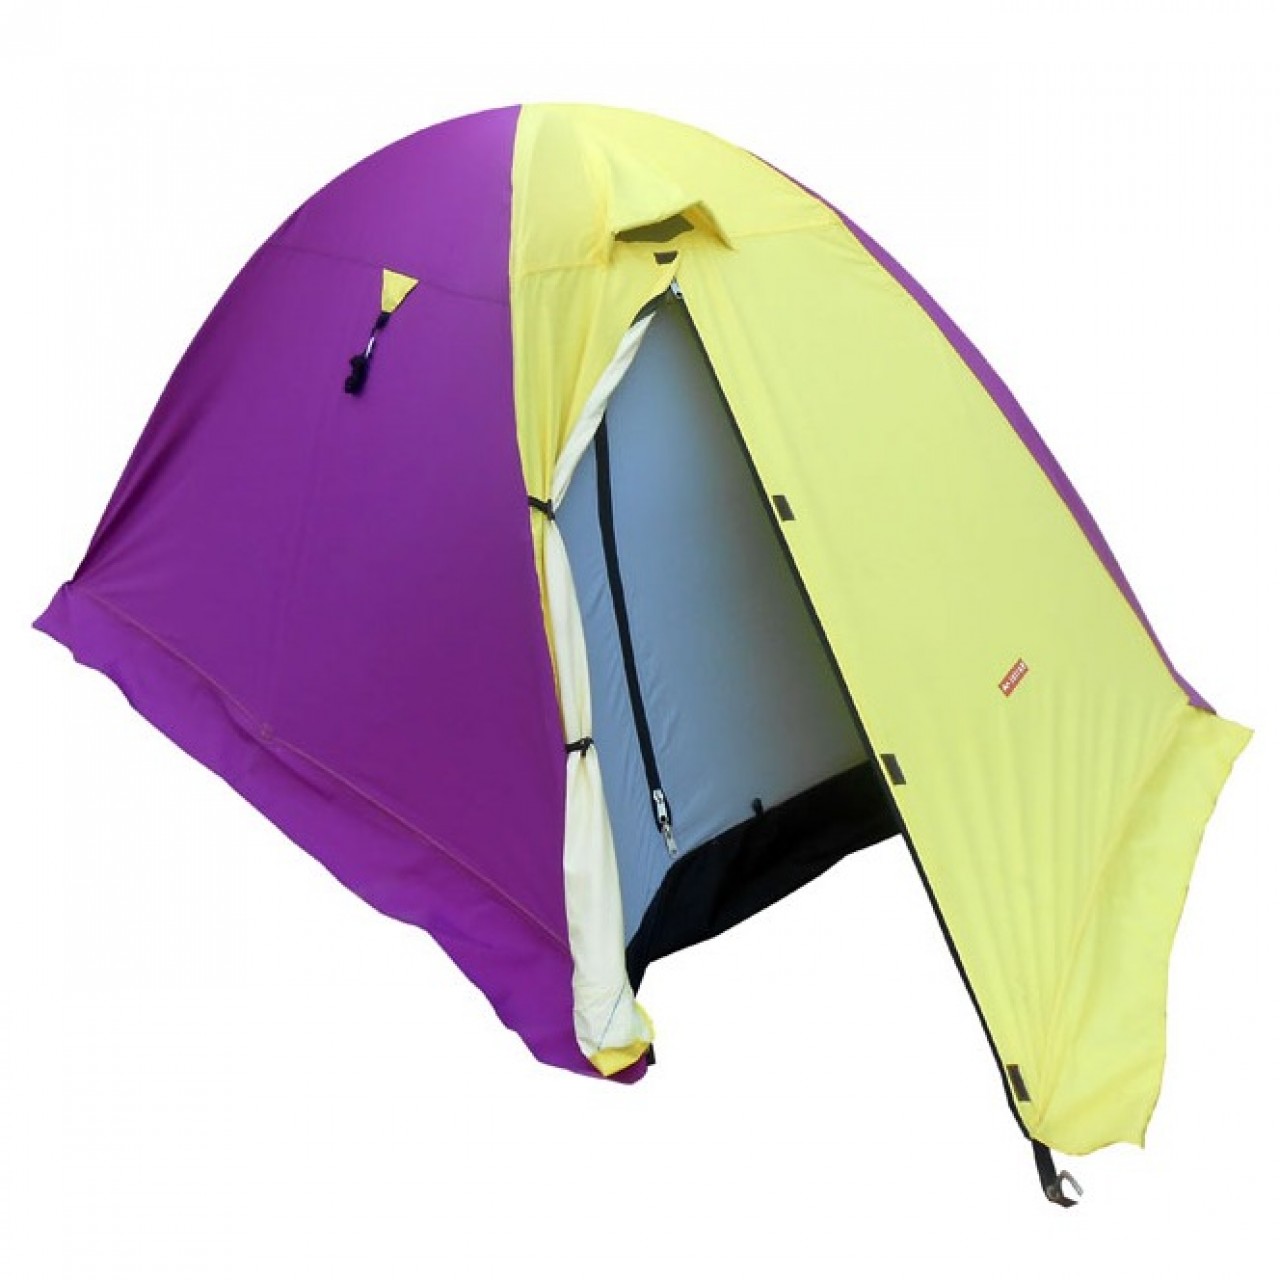 Naran Tent for 2 Person - Purple &Yellow